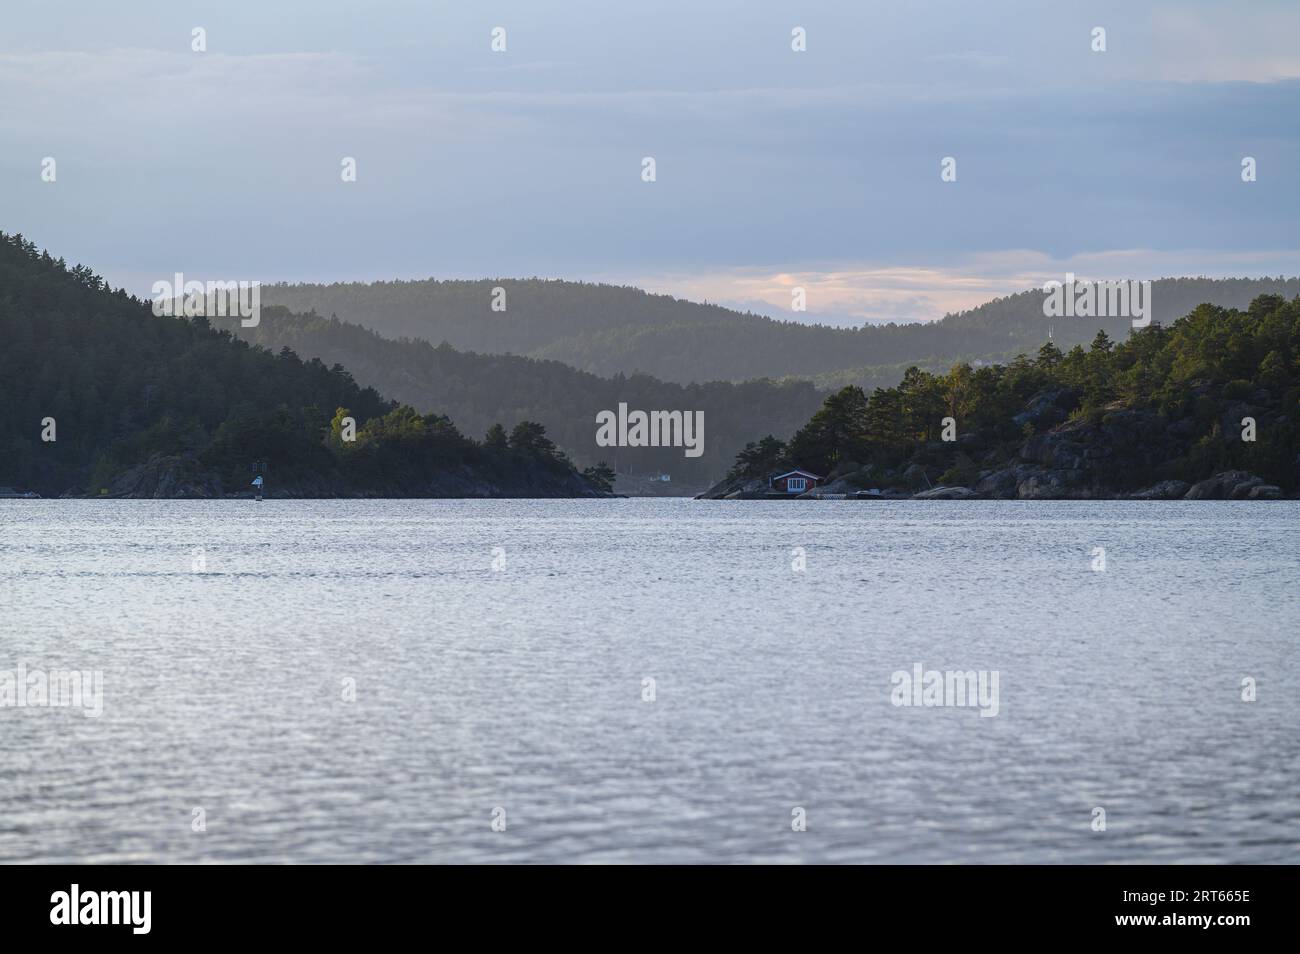 Islands of the Kragero archipelago appear fading in layers in the evening low sunlight. Telemark county, Norway. Stock Photo